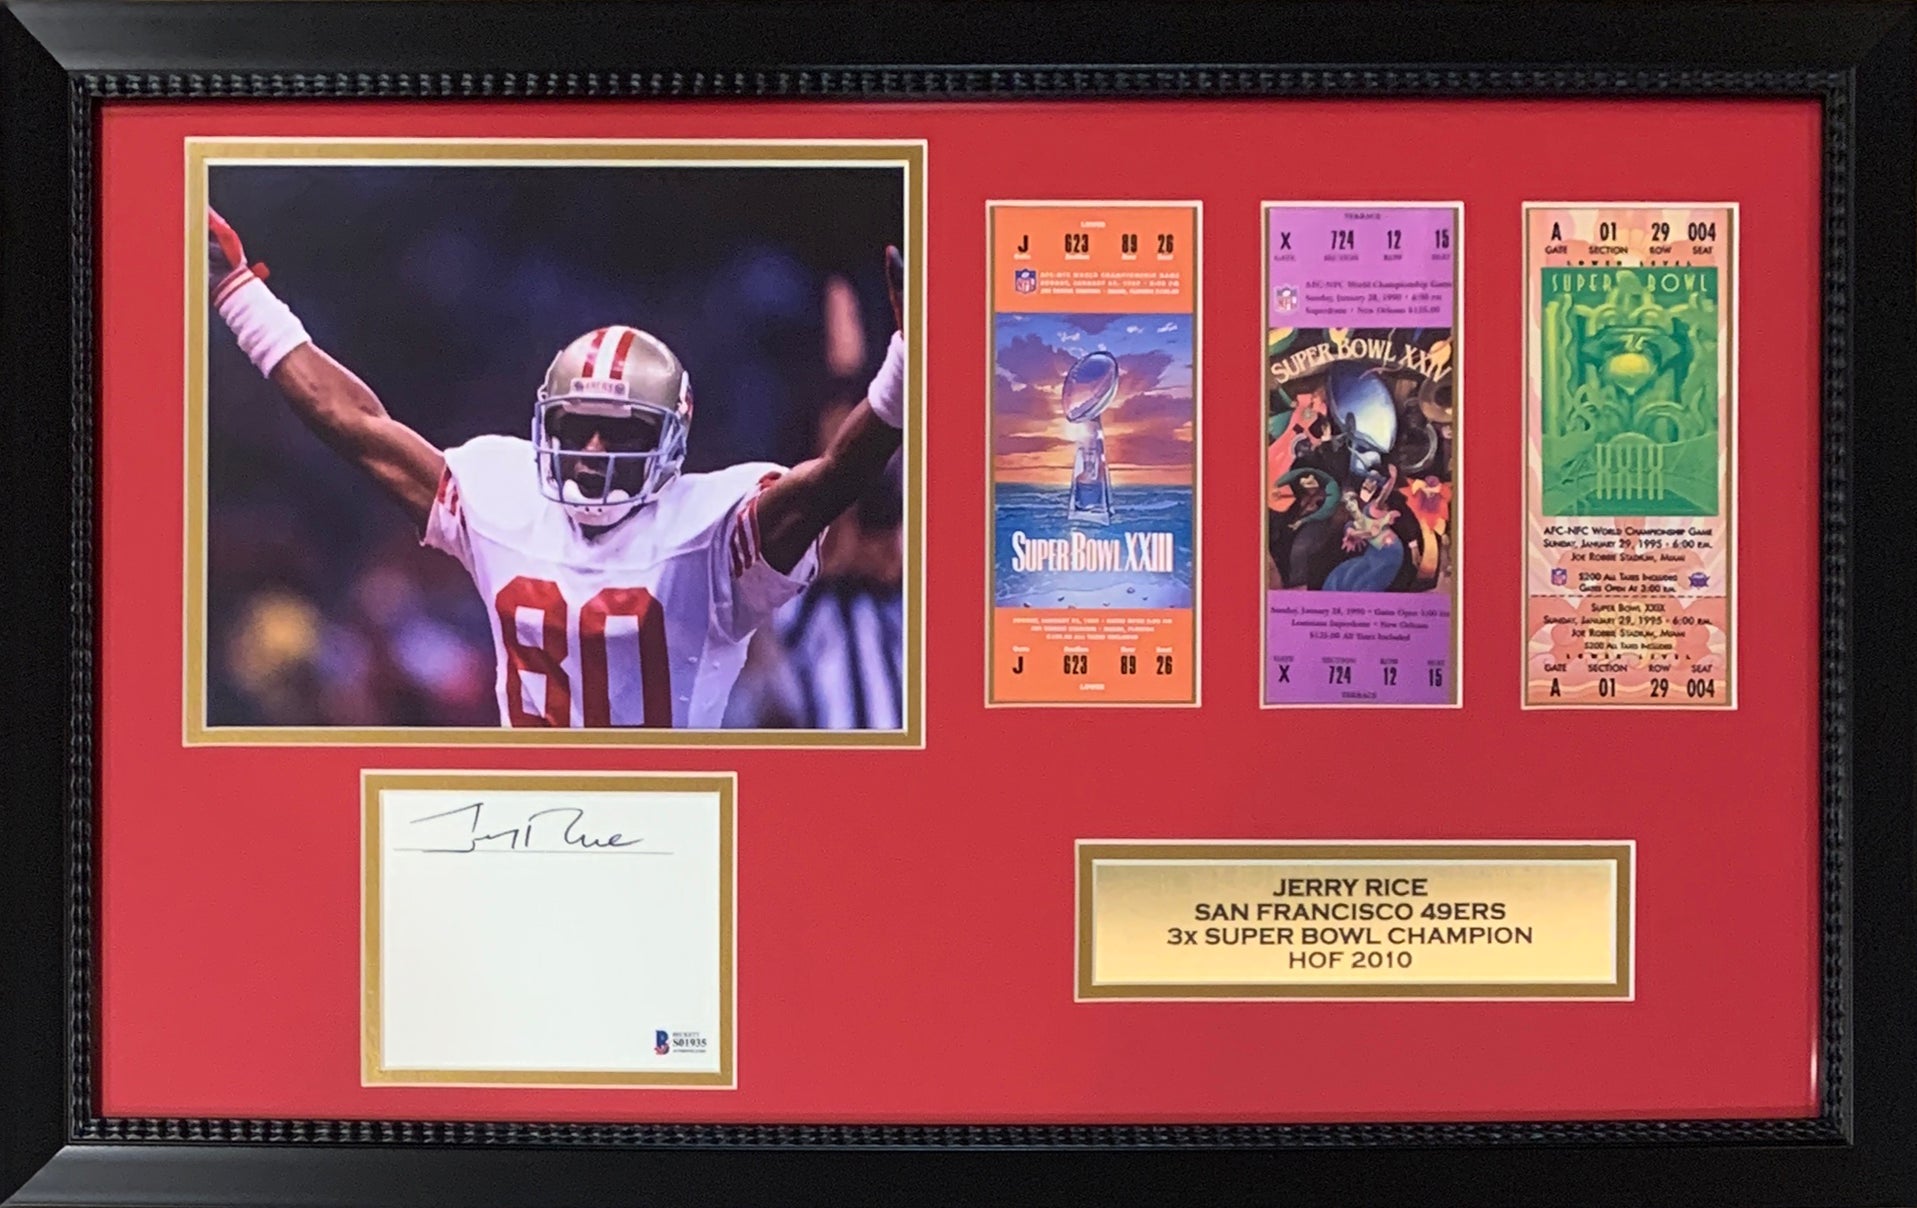 Jerry Rice Autographed San Francisco 49ers Signed Super Bowl Ticket Photo 16x26 Framed Display Beckett Authentication COA-Powers Sports Memorabilia